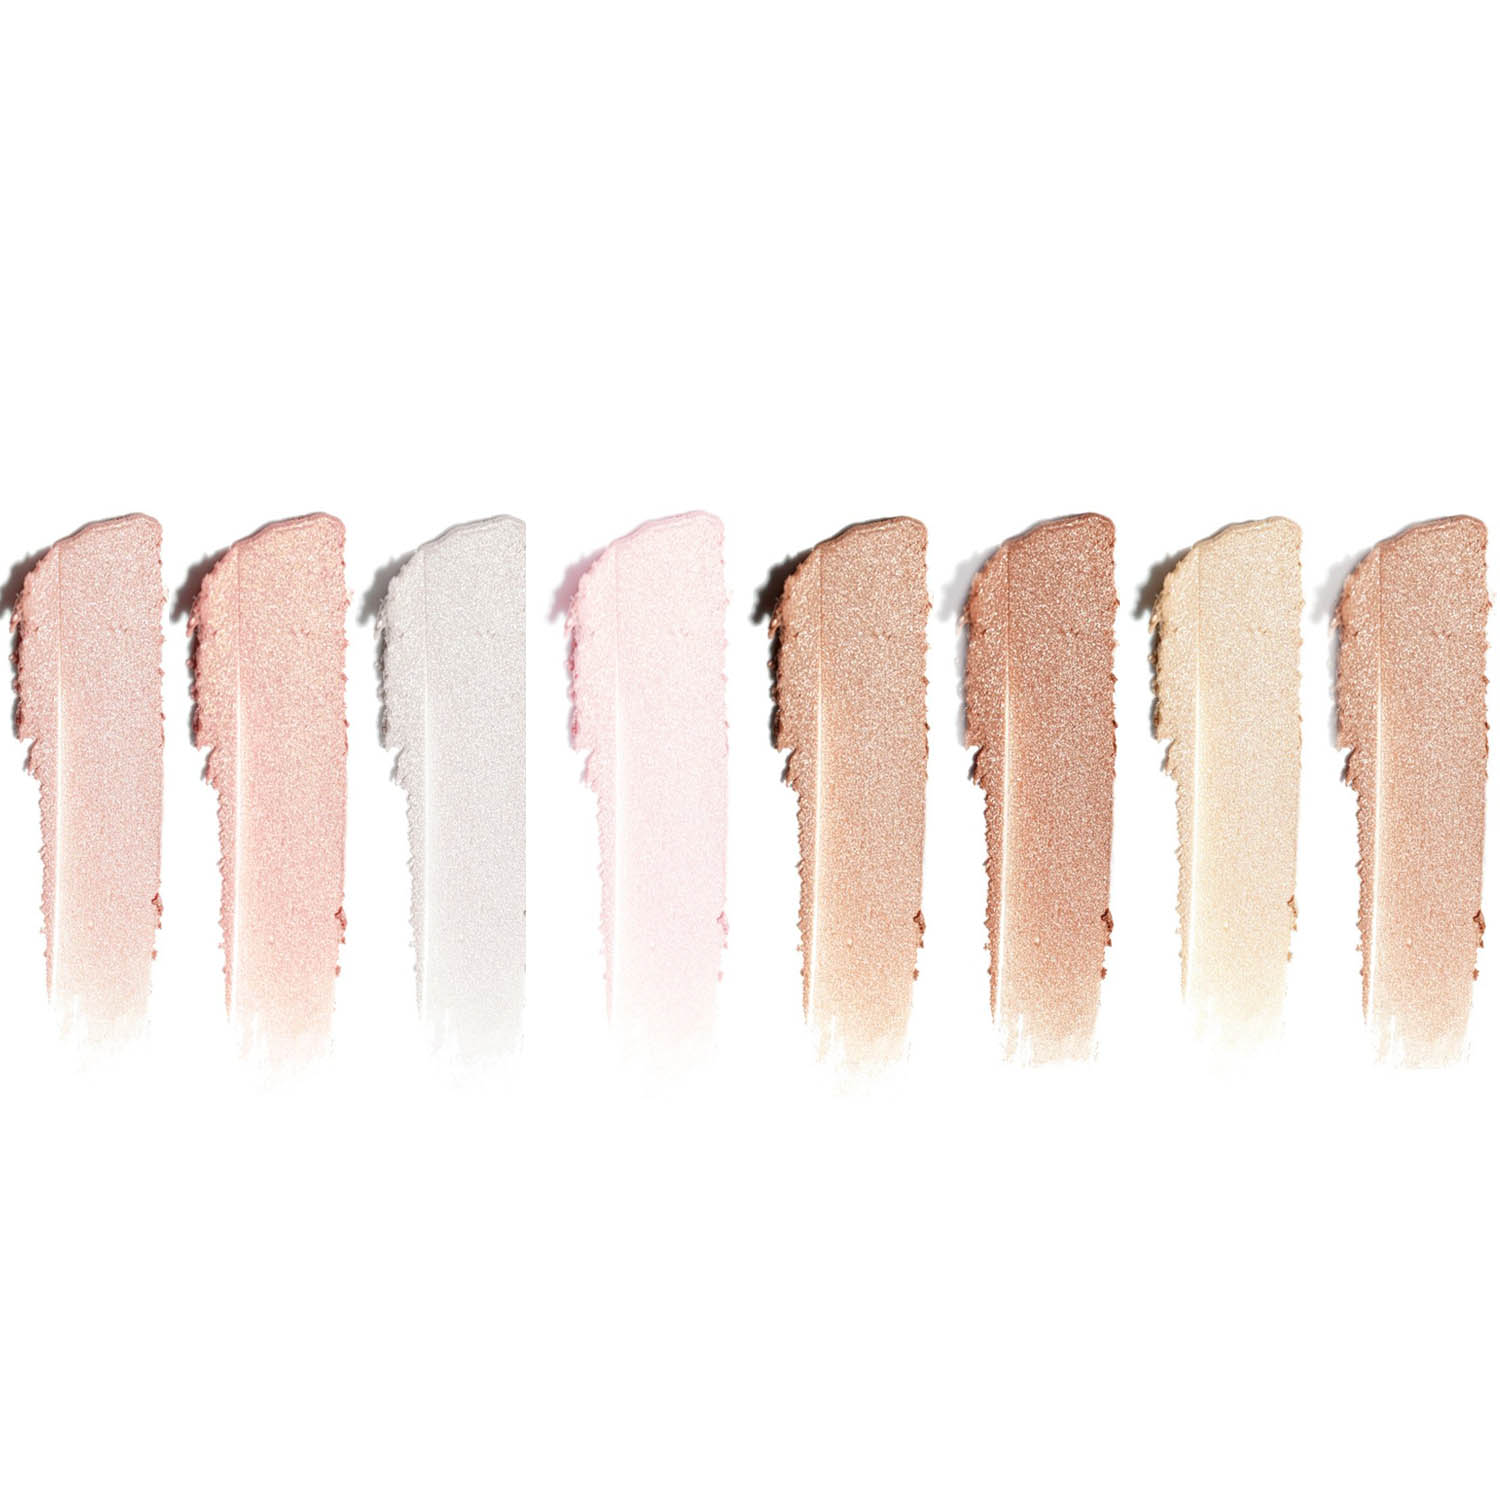 JOUER Powder Highlighter Colors Swatches